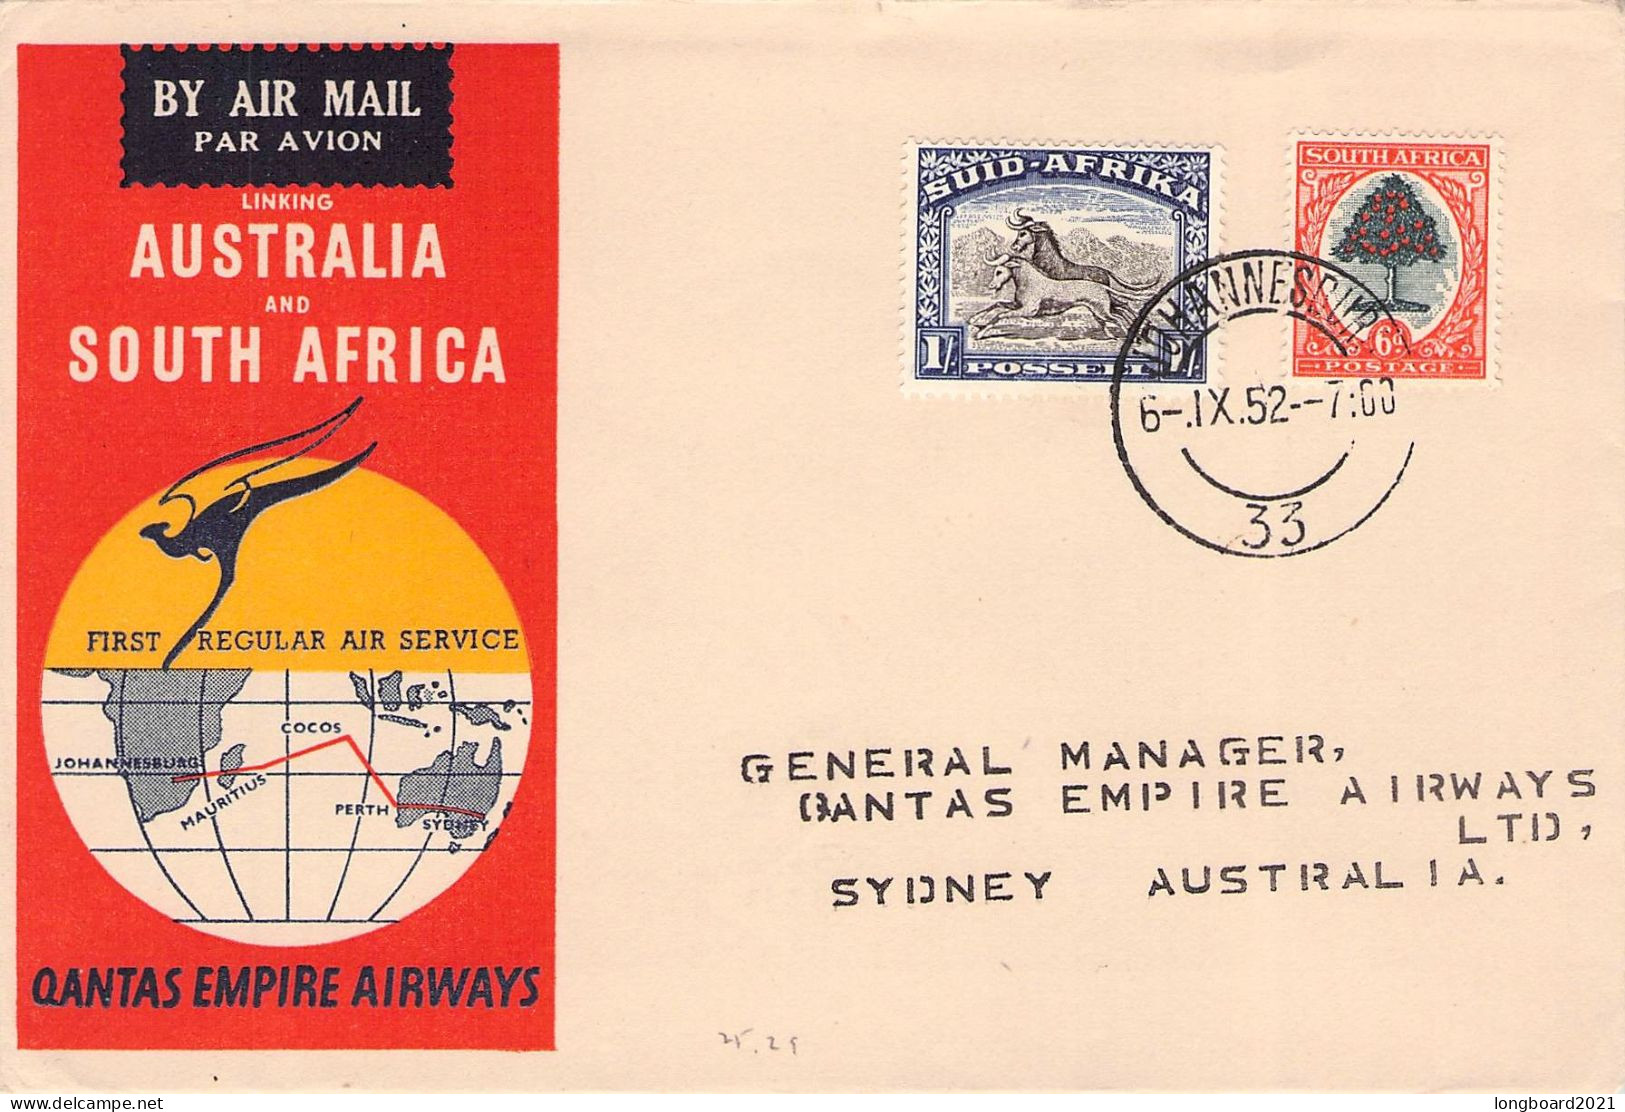 SOUTH AFRICA - FIRST FLIGHT 1952 QUANTAS AUSTRALIA - SOUTH AFRICA / 5236 - Luchtpost